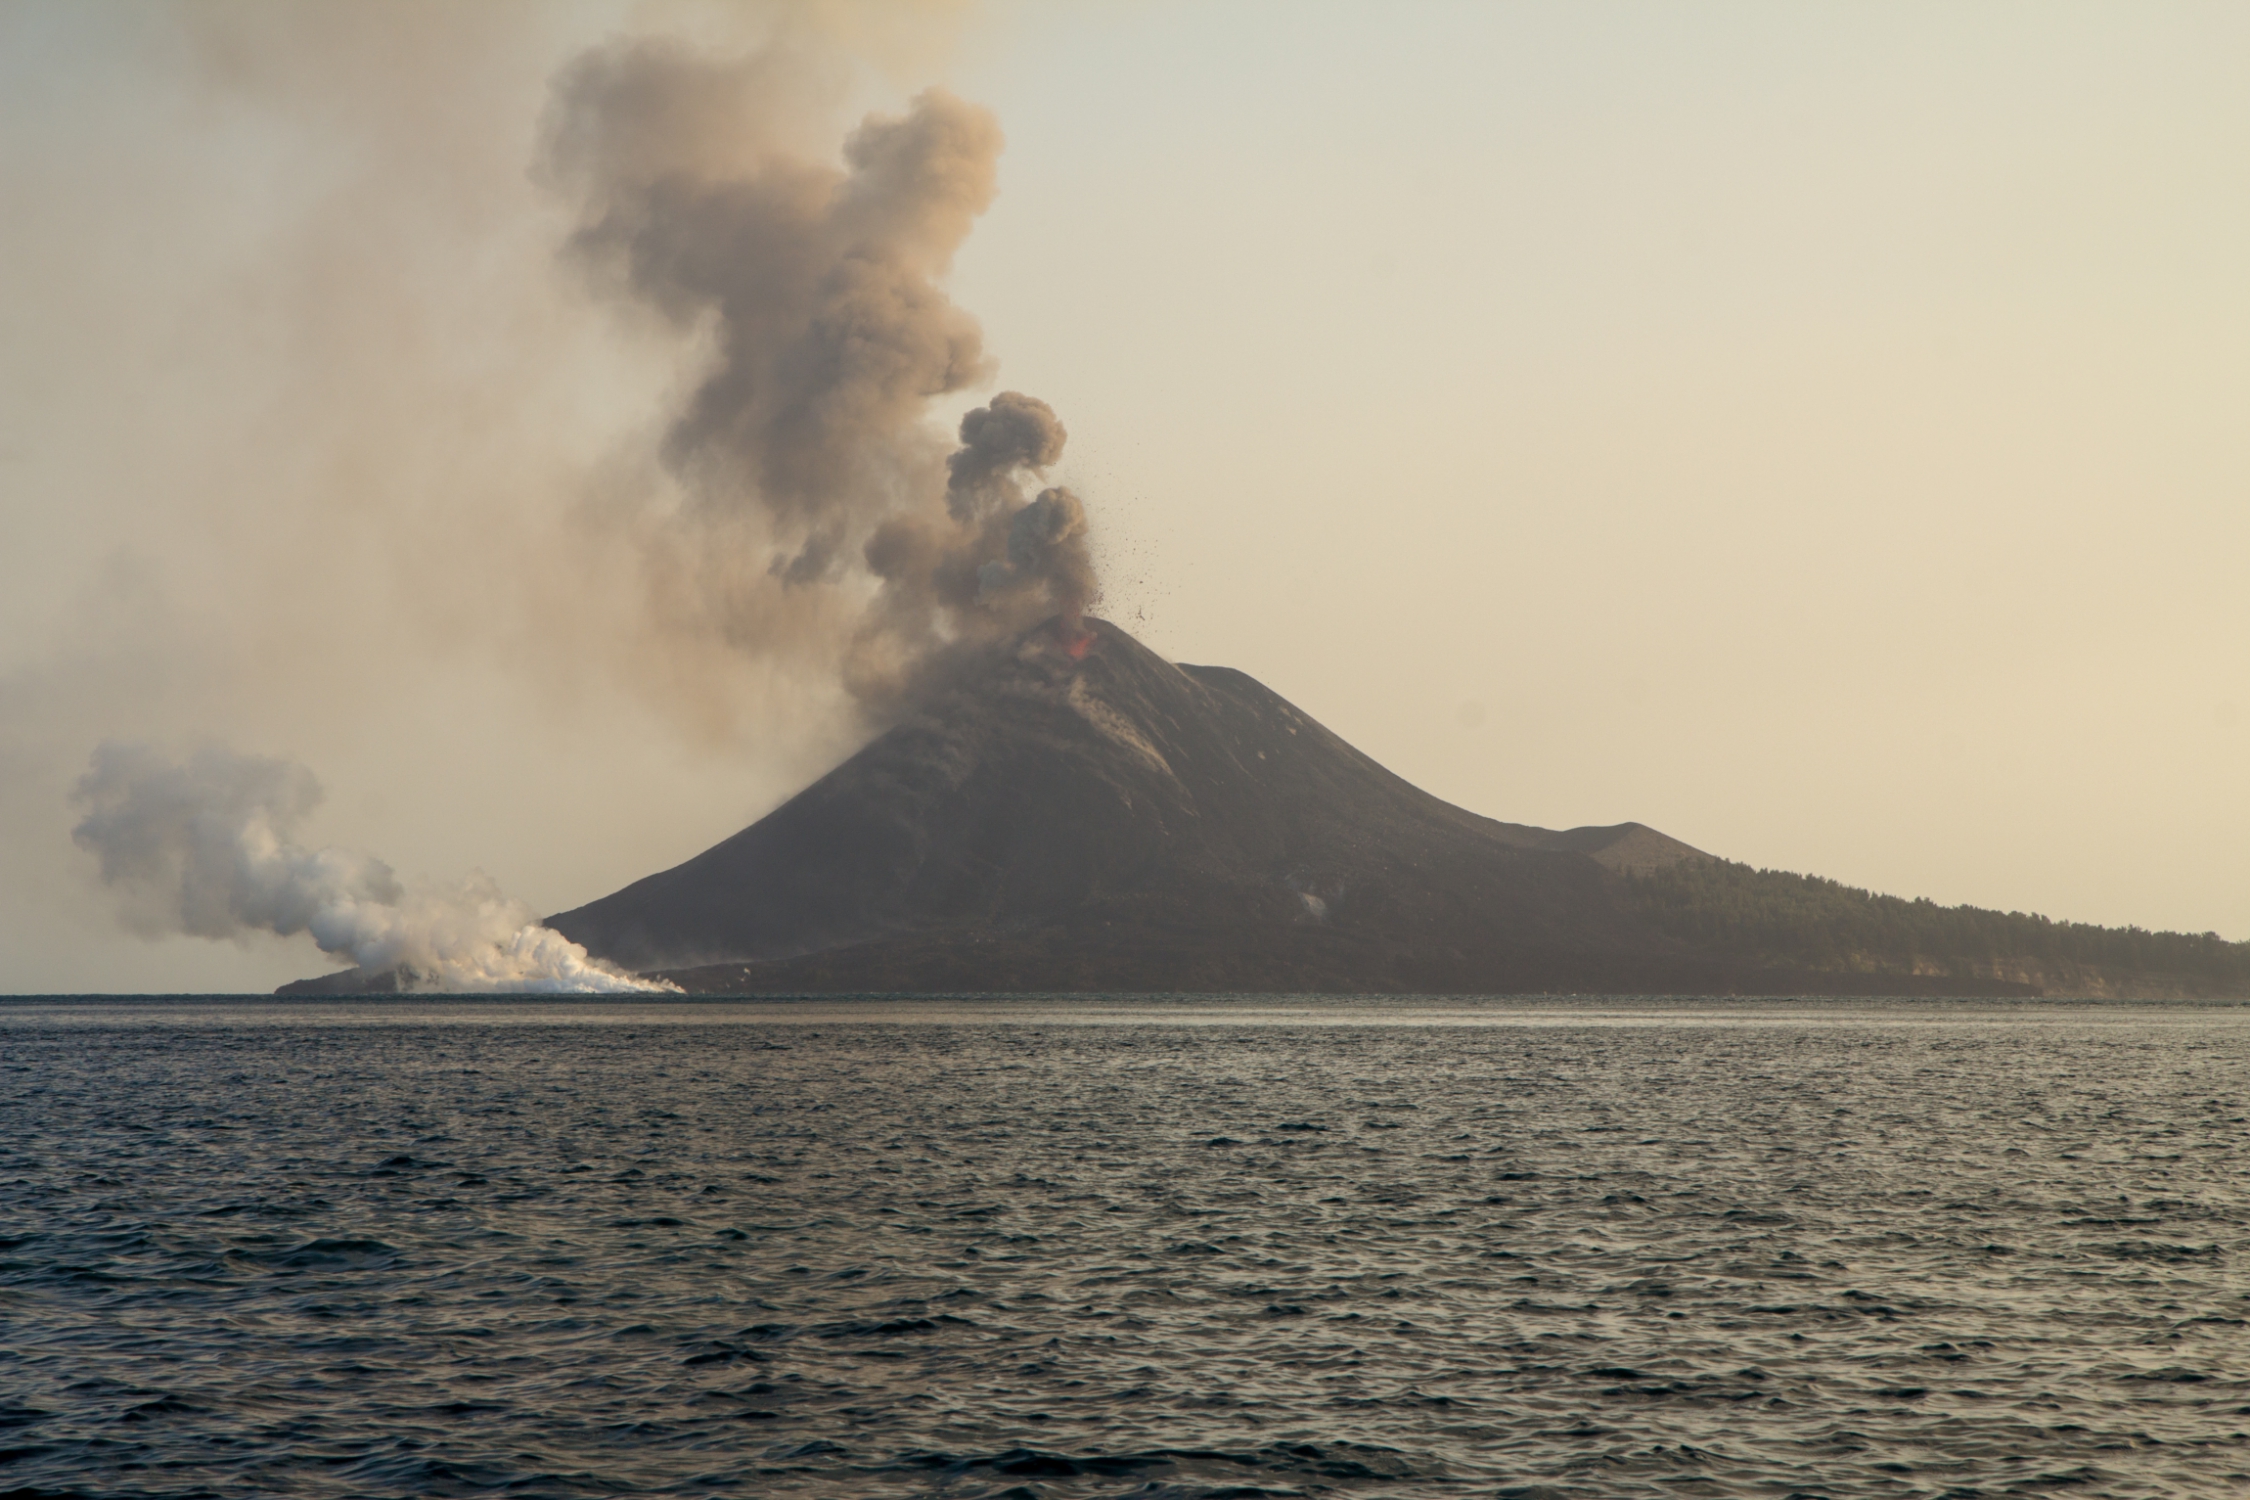 “This event underscores how little we know about tsunamis generated by volcanoes,” says Professor Adam Switzer, Principal Investigator at EOS (Source: Dr James D. P. Moore/Earth Observatory of Singapore)